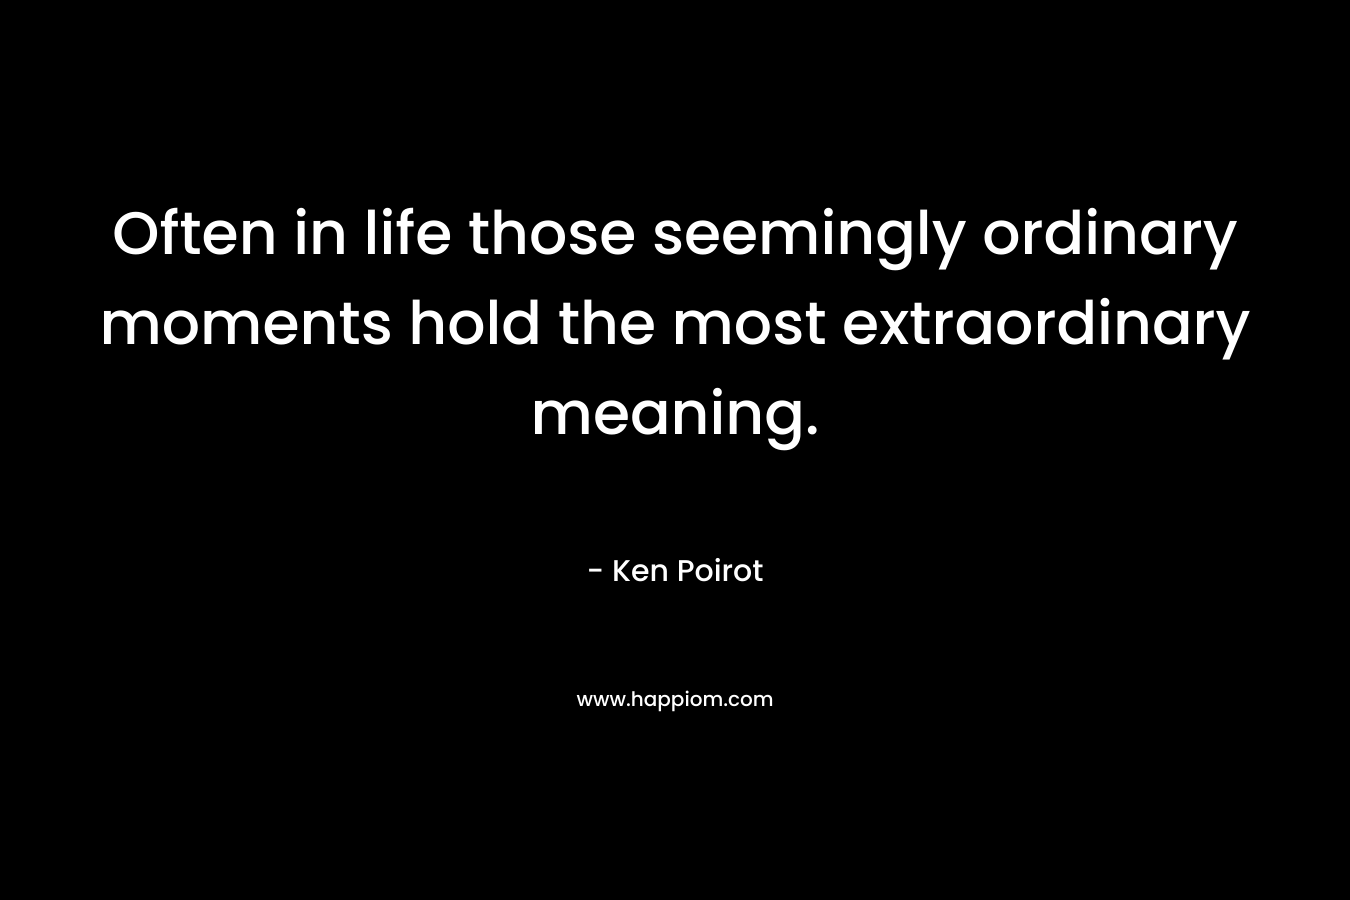 Often in life those seemingly ordinary moments hold the most extraordinary meaning.